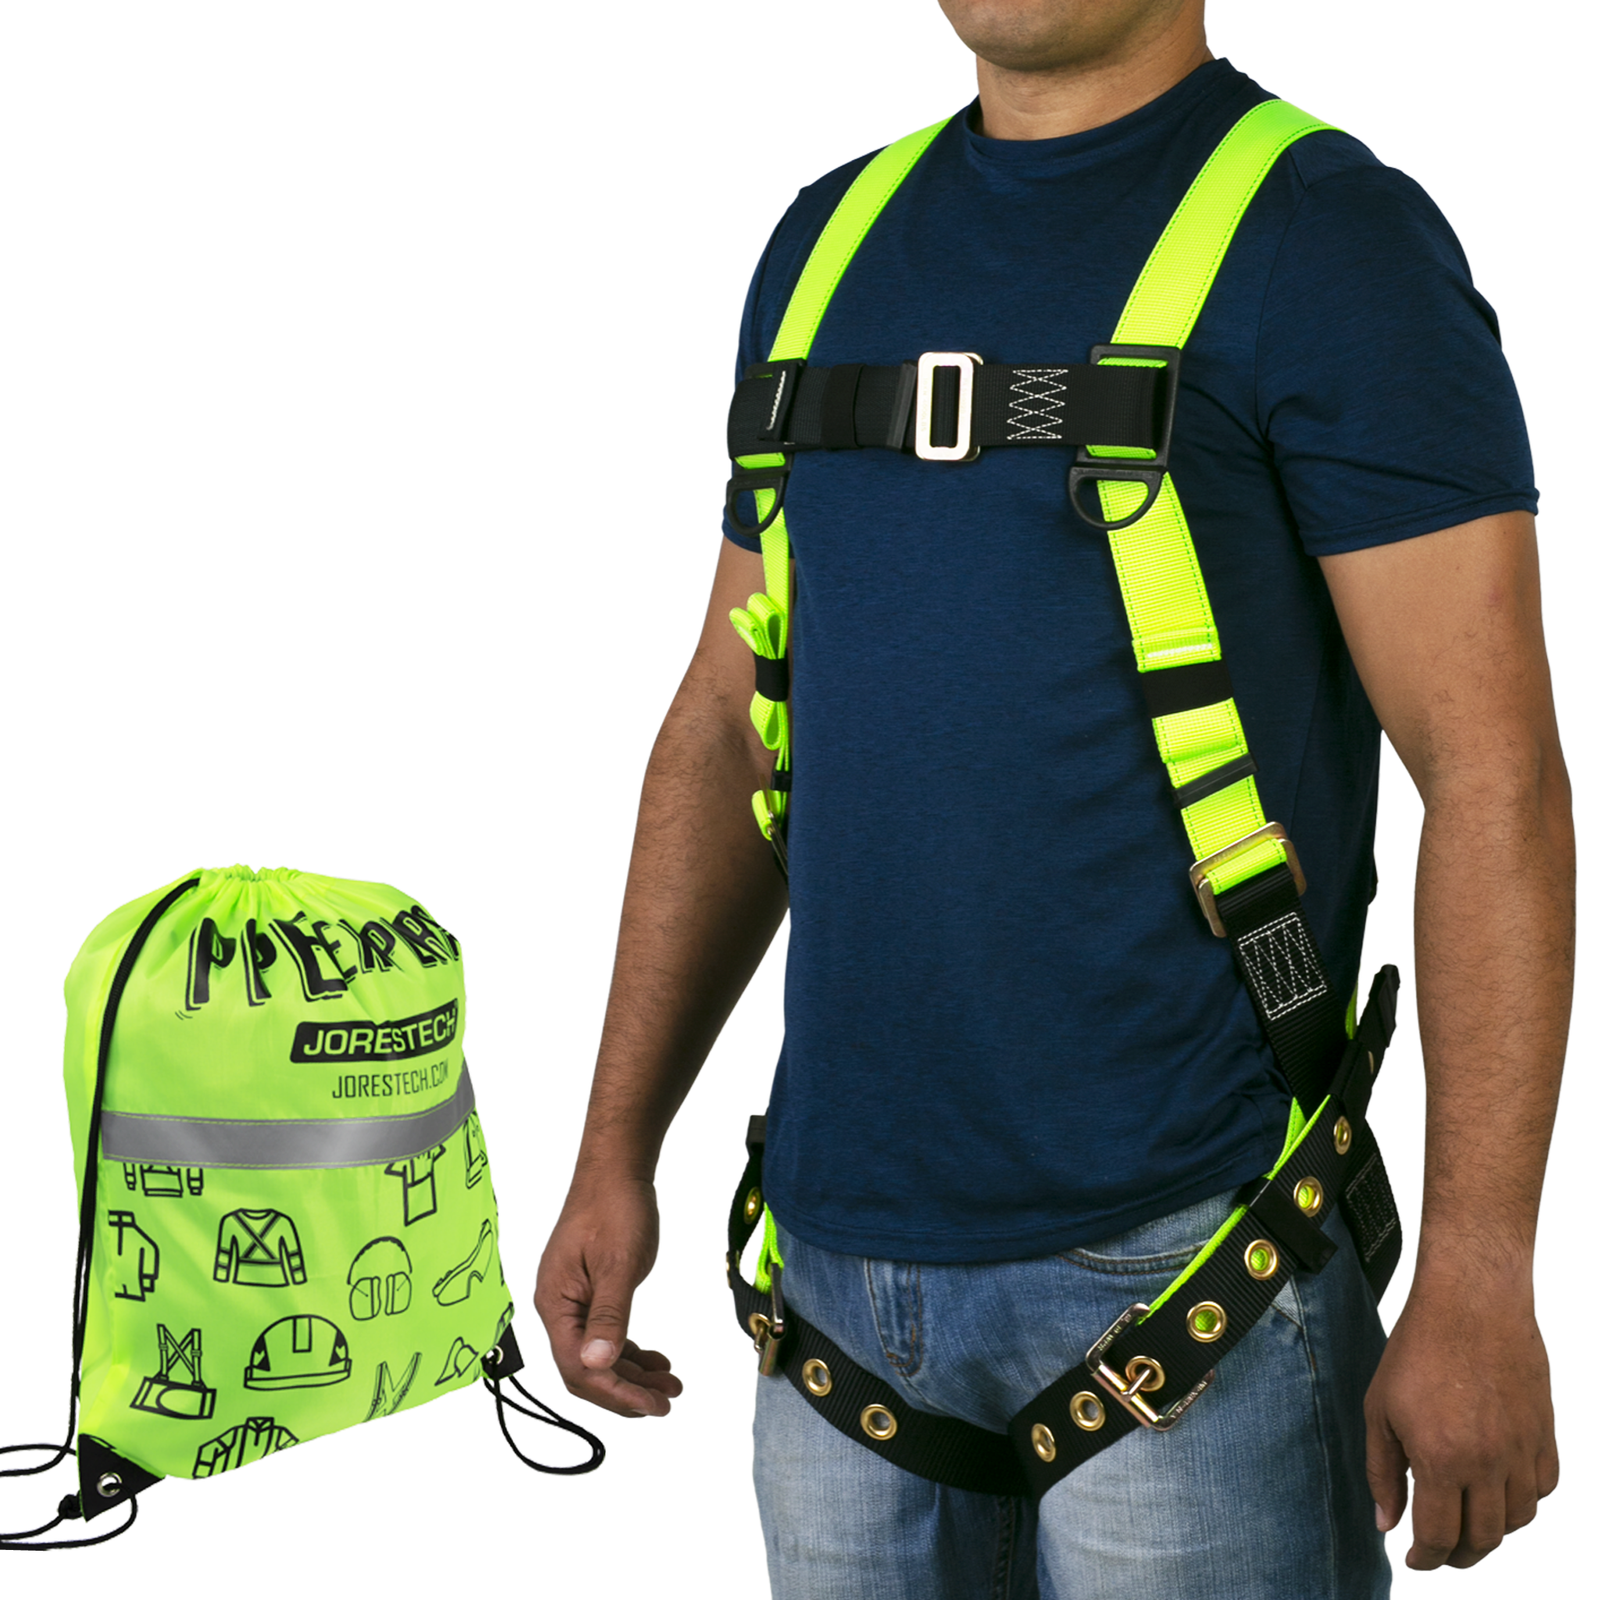 JORESTECH Safety Harness Full Body Protection Fall Arrest Yellow/Lime Back D Ring Grommet Leg Straps ANSI with High